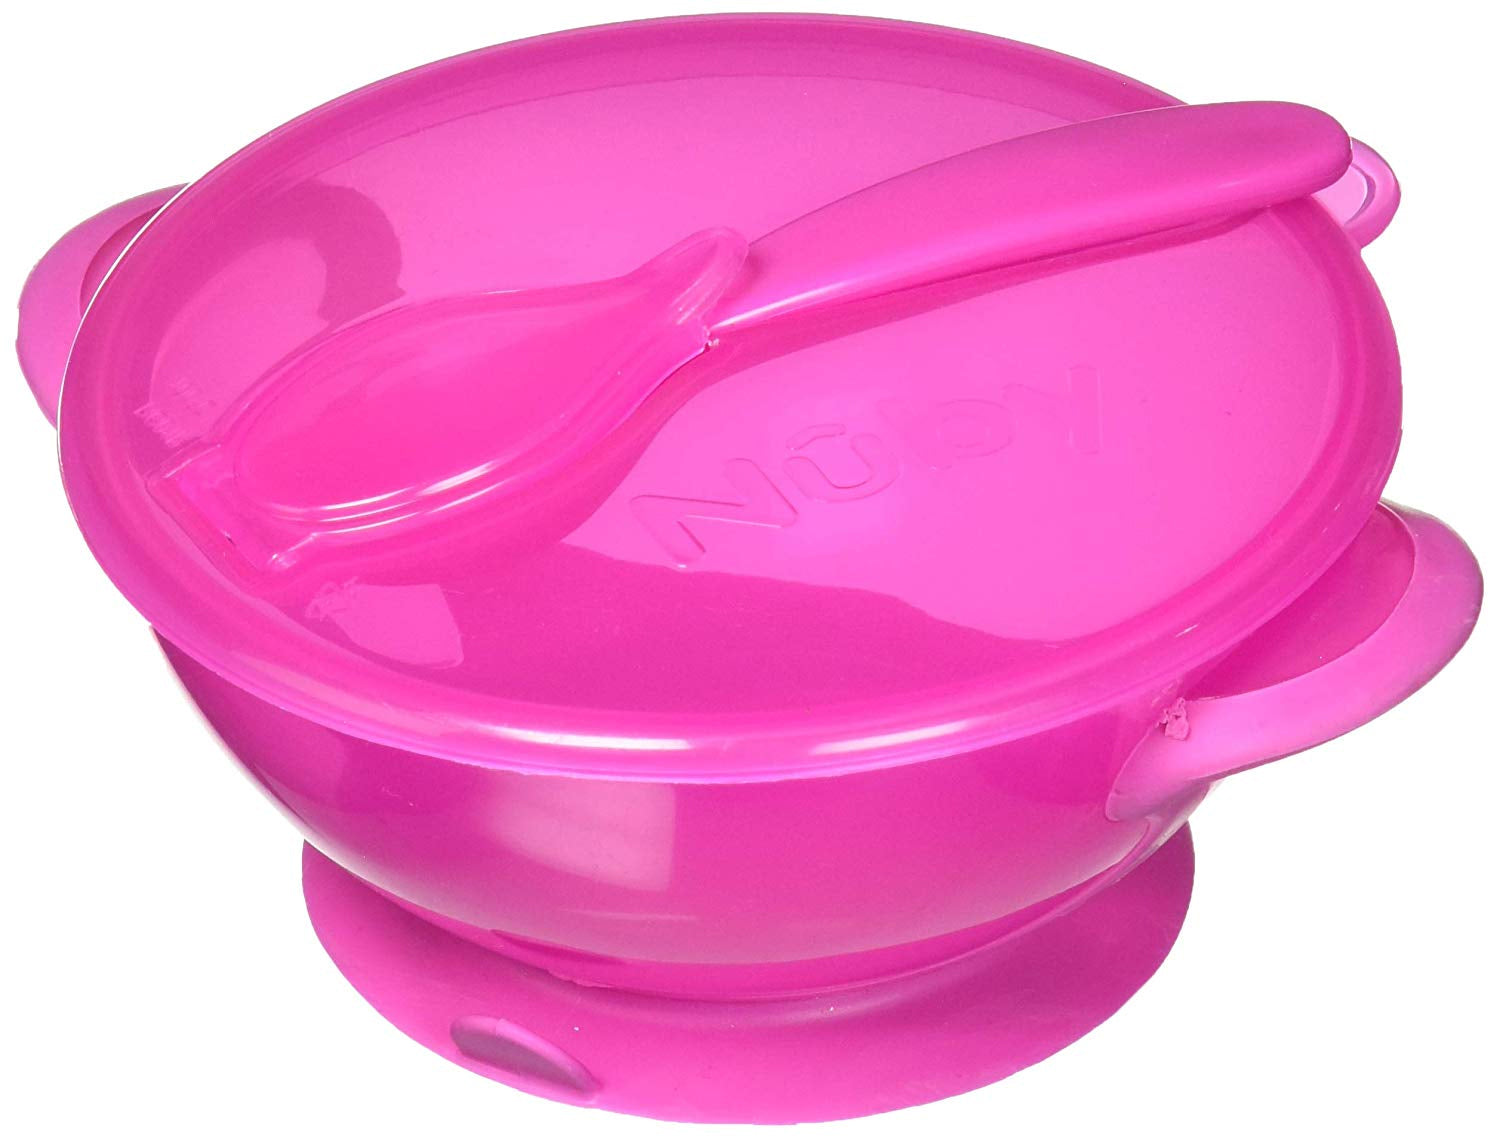 Nuby Easy Go Suction Bowl & Spoon with Lid - Durable - BPA Free -Multiple  Colors